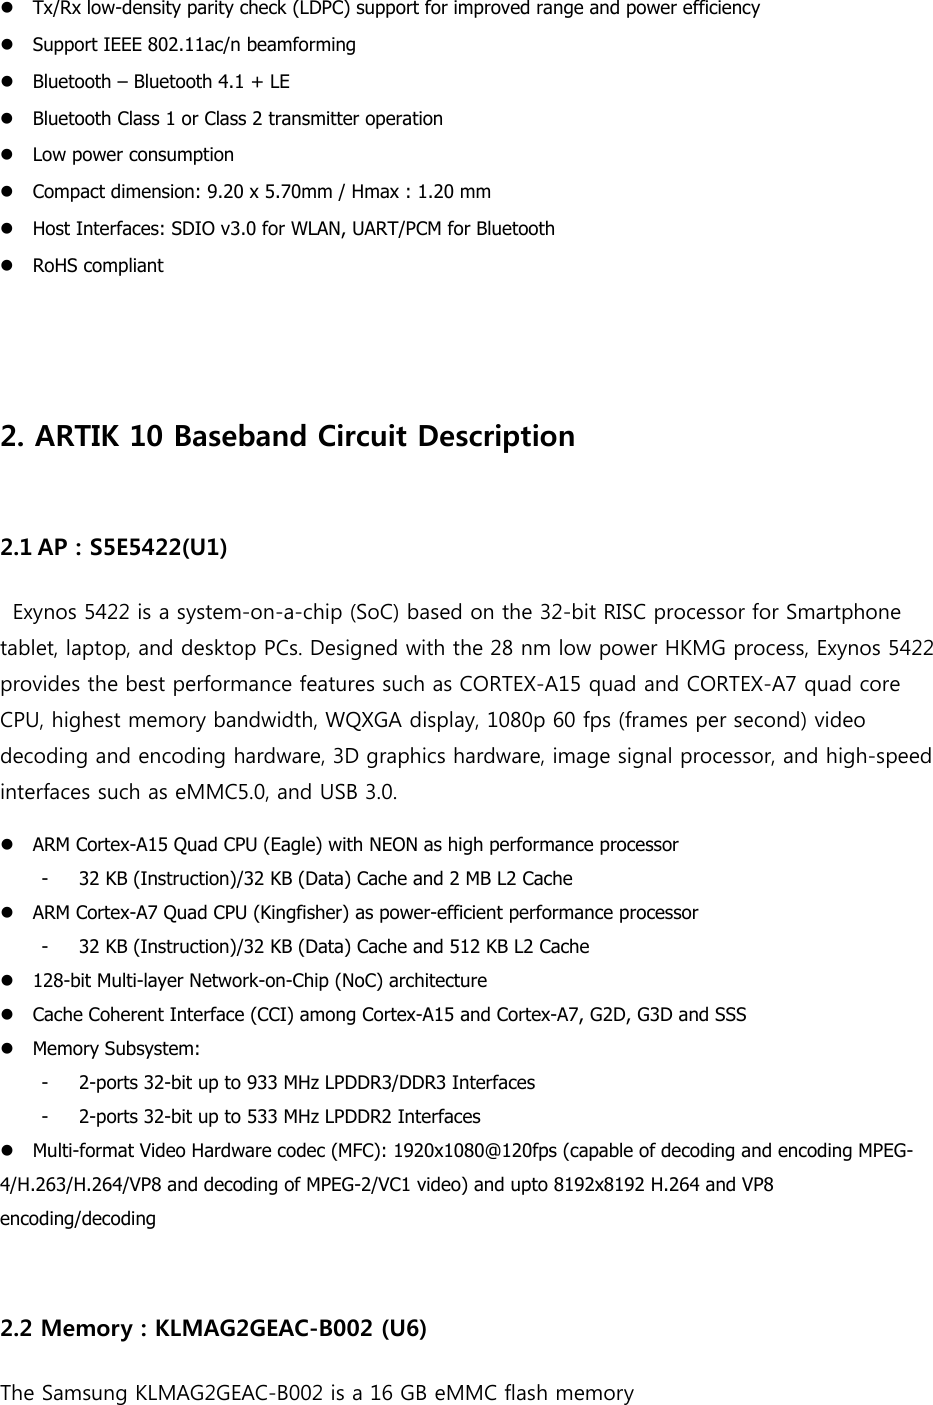 Tx/Rx low-density parity check (LDPC) support for improved range and power efficiencySupport IEEE 802.11ac/n beamformingBluetooth – Bluetooth 4.1 + LEBluetooth Class 1 or Class 2 transmitter operationLow power consumptionCompact dimension: 9.20 x 5.70mm / Hmax : 1.20 mmHost Interfaces: SDIO v3.0 for WLAN, UART/PCM for BluetoothRoHS compliant2.ARTIK 10 Baseband Circuit Description2.1 AP : S5E5422(U1)  Exynos 5422 is a system-on-a-chip (SoC) based on the 32-bit RISC processor for Smartphone tablet, laptop, and desktop PCs. Designed with the 28 nm low power HKMG process, Exynos 5422 provides the best performance features such as CORTEX-A15 quad and CORTEX-A7 quad core CPU, highest memory bandwidth, WQXGA display, 1080p 60 fps (frames per second) video decoding and encoding hardware, 3D graphics hardware, image signal processor, and high-speed interfaces such as eMMC5.0, and USB 3.0. ARM Cortex-A15 Quad CPU (Eagle) with NEON as high performance processor- 32 KB (Instruction)/32 KB (Data) Cache and 2 MB L2 Cache ARM Cortex-A7 Quad CPU (Kingfisher) as power-efficient performance processor- 32 KB (Instruction)/32 KB (Data) Cache and 512 KB L2 Cache 128-bit Multi-layer Network-on-Chip (NoC) architectureCache Coherent Interface (CCI) among Cortex-A15 and Cortex-A7, G2D, G3D and SSSMemory Subsystem:- 2-ports 32-bit up to 933 MHz LPDDR3/DDR3 Interfaces - 2-ports 32-bit up to 533 MHz LPDDR2 Interfaces Multi-format Video Hardware codec (MFC): 1920x1080@120fps (capable of decoding and encoding MPEG-4/H.263/H.264/VP8 and decoding of MPEG-2/VC1 video) and upto 8192x8192 H.264 and VP8 encoding/decoding 2.2 Memory : KLMAG2GEAC-B002 (U6) The Samsung KLMAG2GEAC-B002 is a 16 GB eMMC flash memory 